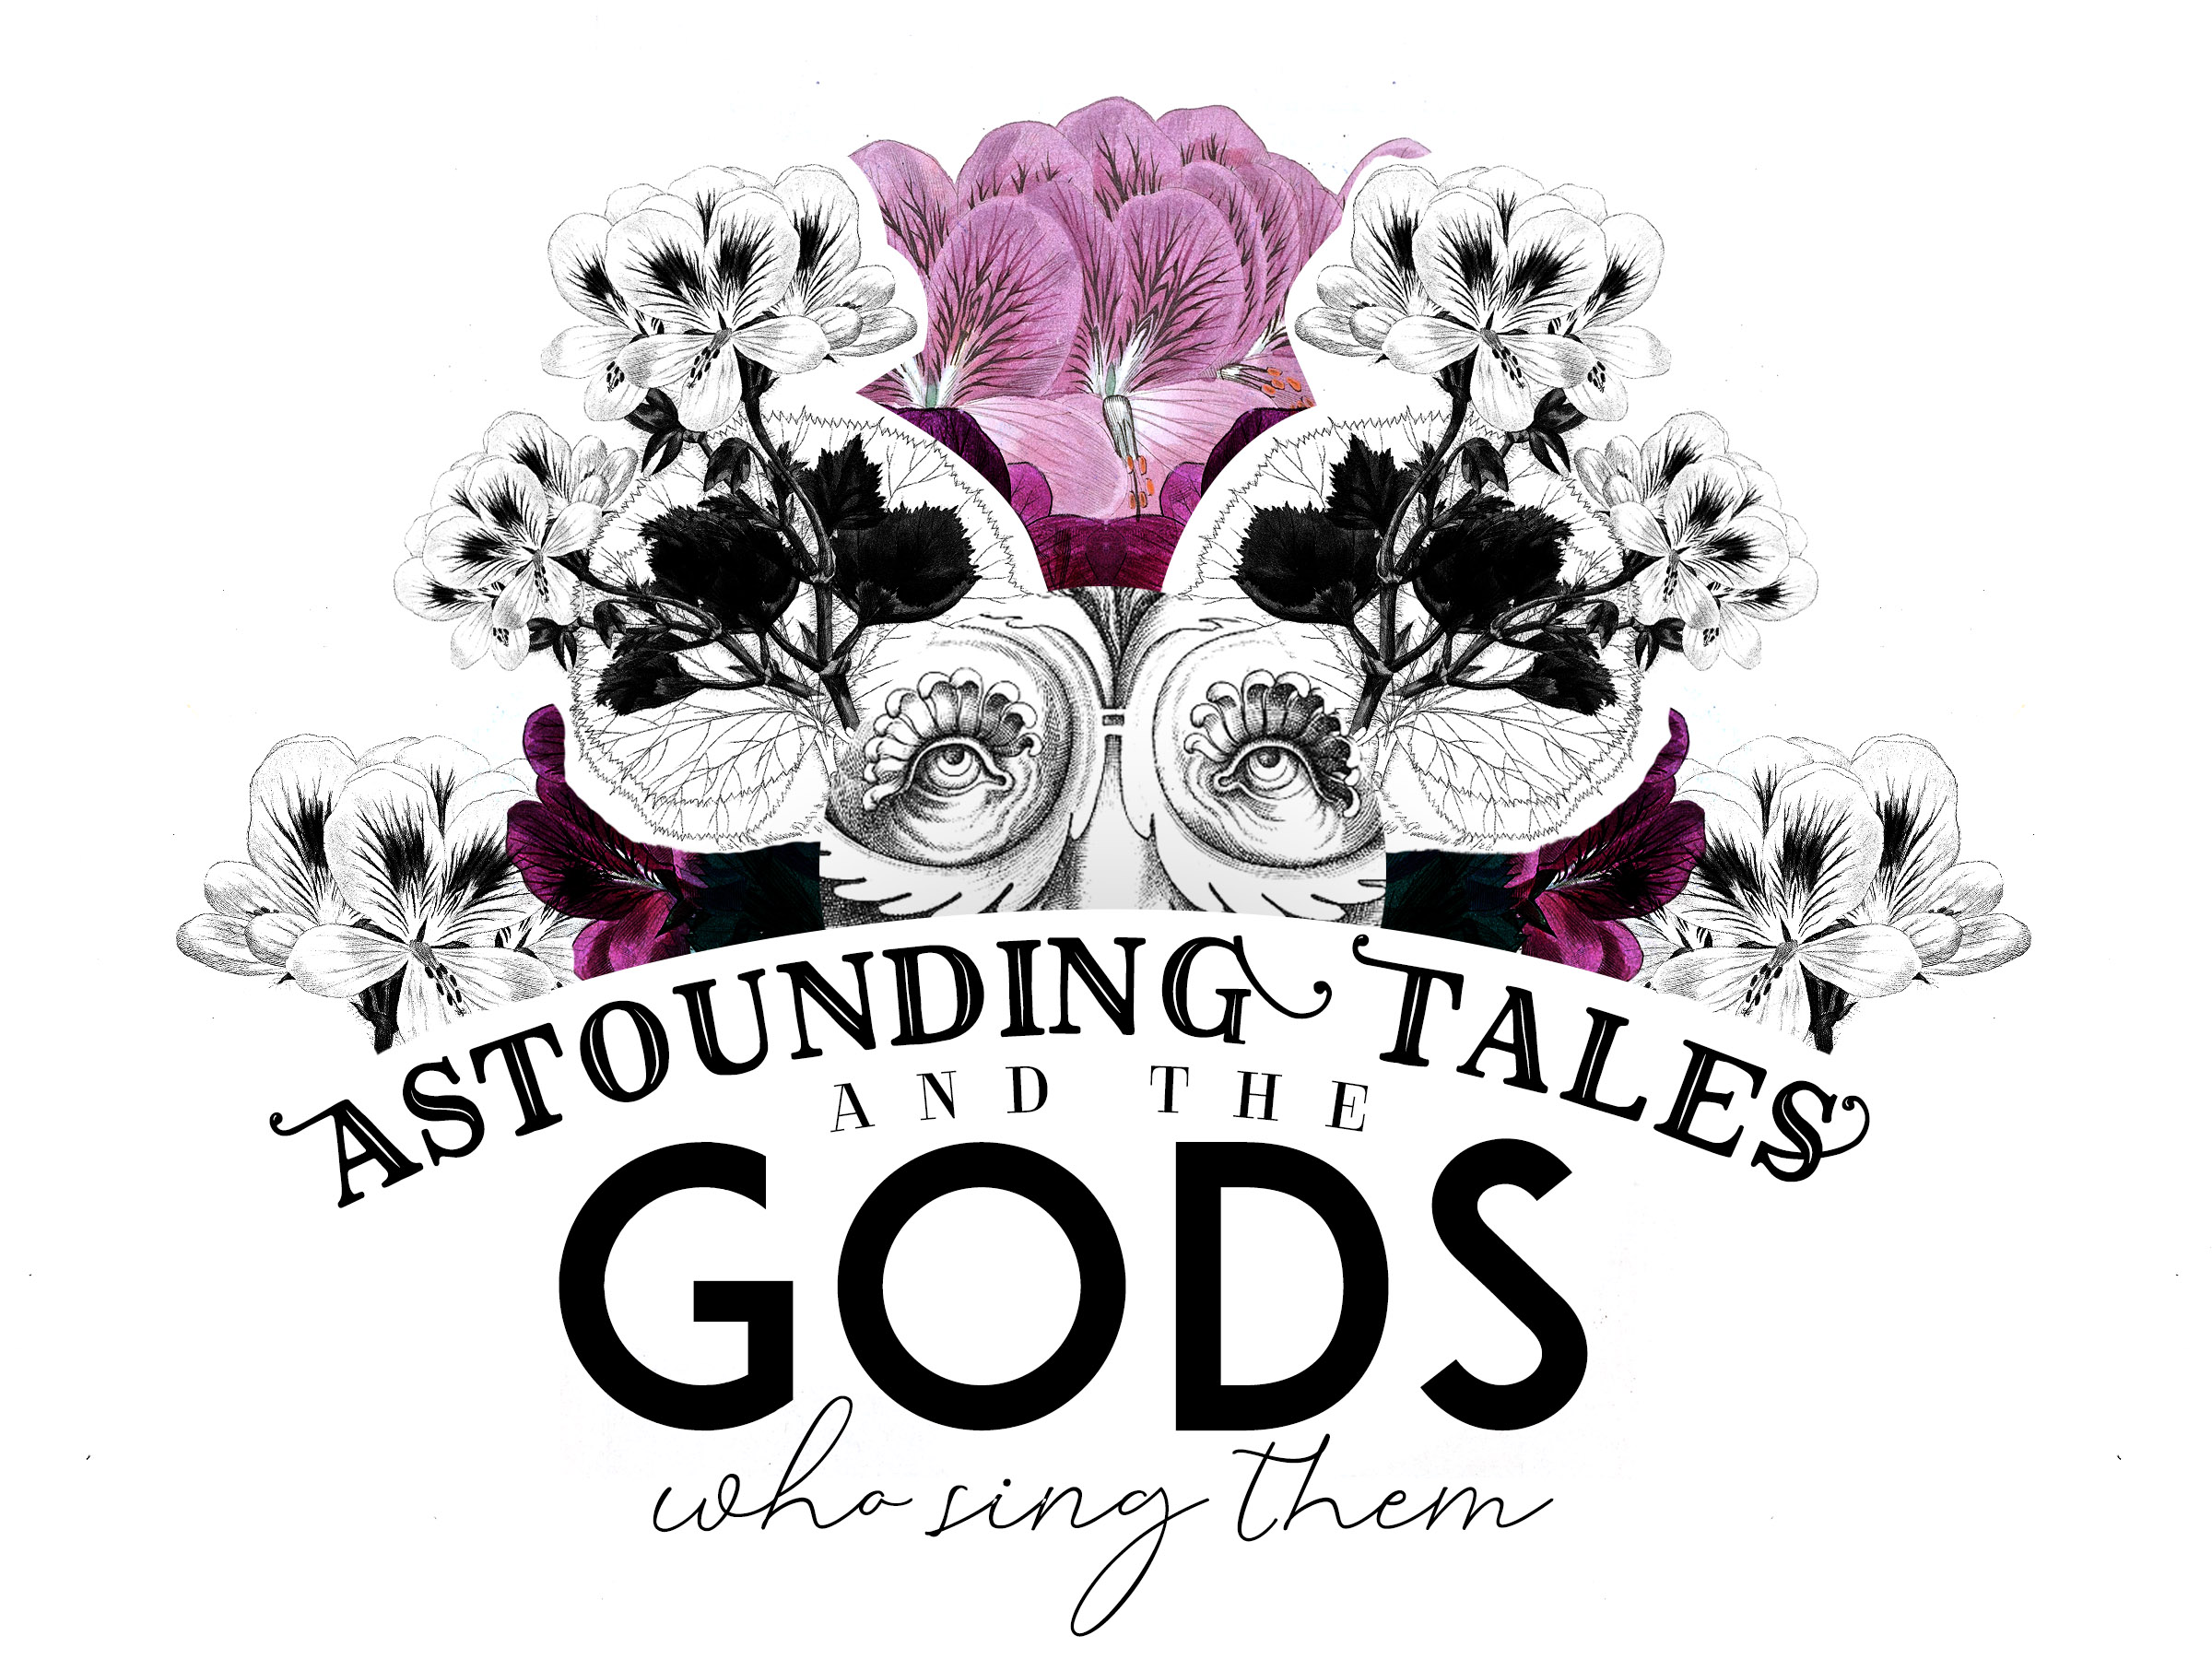 Astounding Tales and the Gods who Sing Them